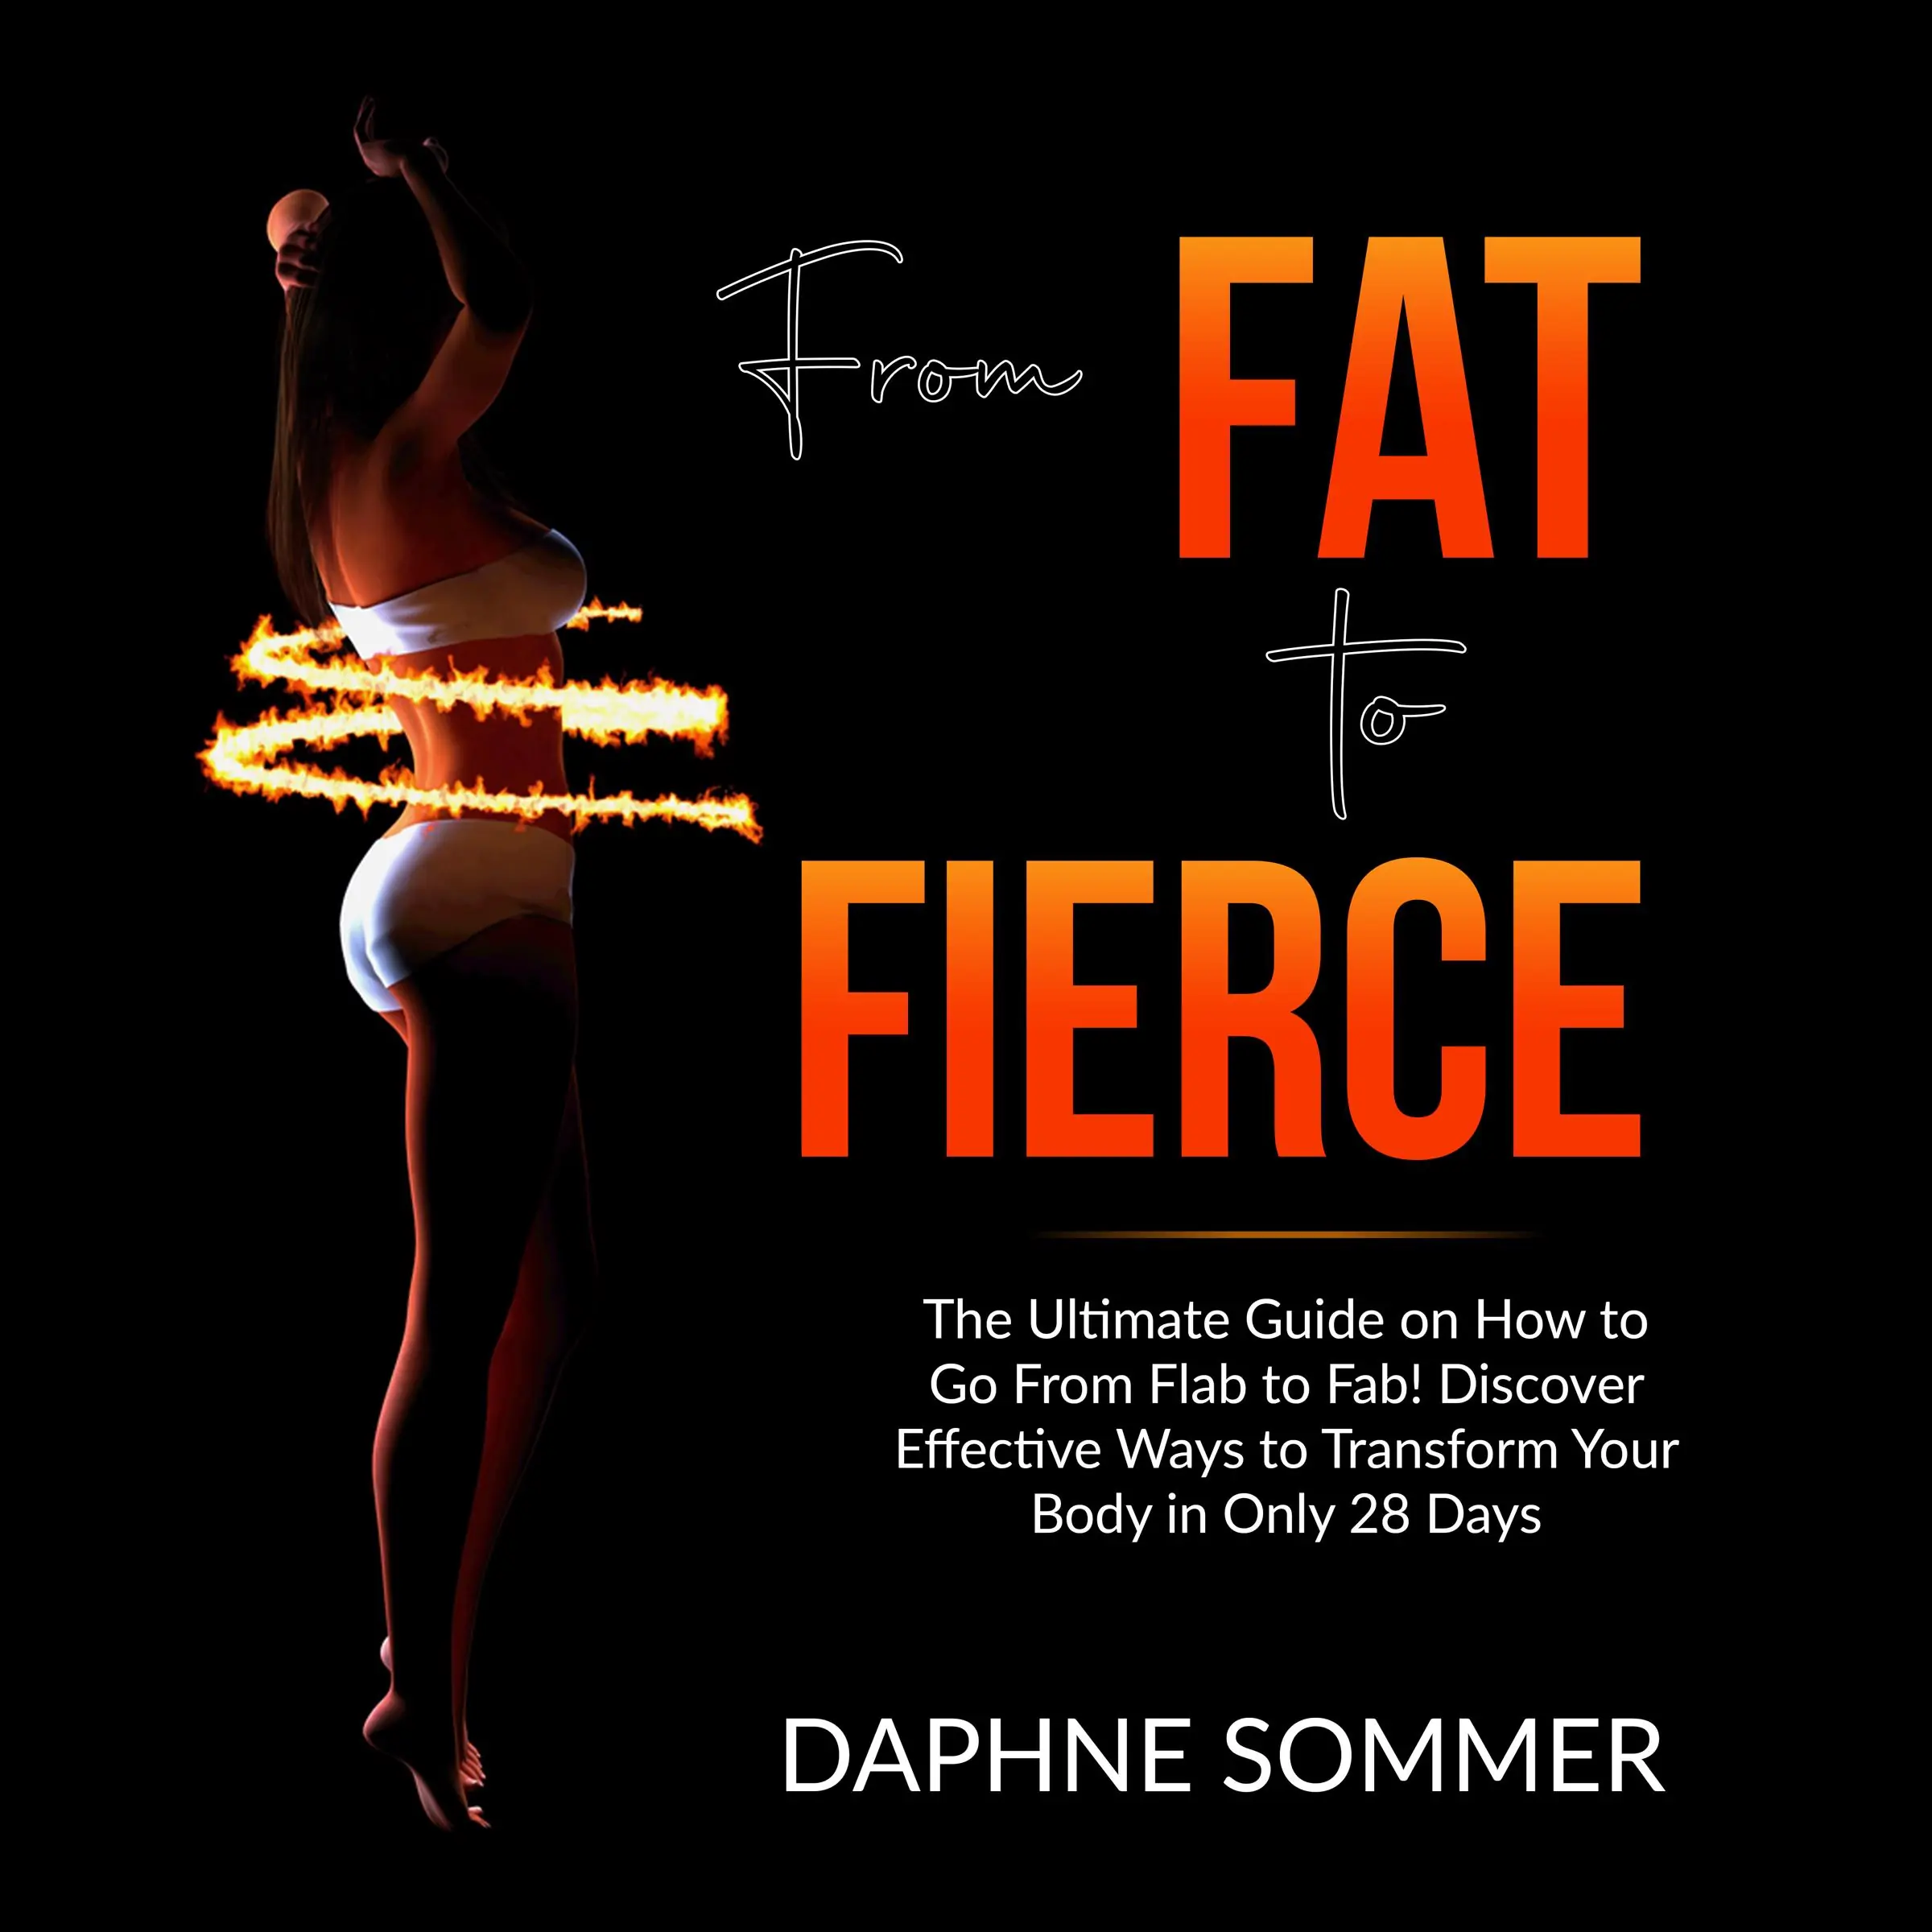 From Fat to Fierce: The Ultimate Guide on How to Go From Flab to Fab! Discover Effective Ways to Transform Your Body in Only 28 Days Audiobook by Daphne Sommer